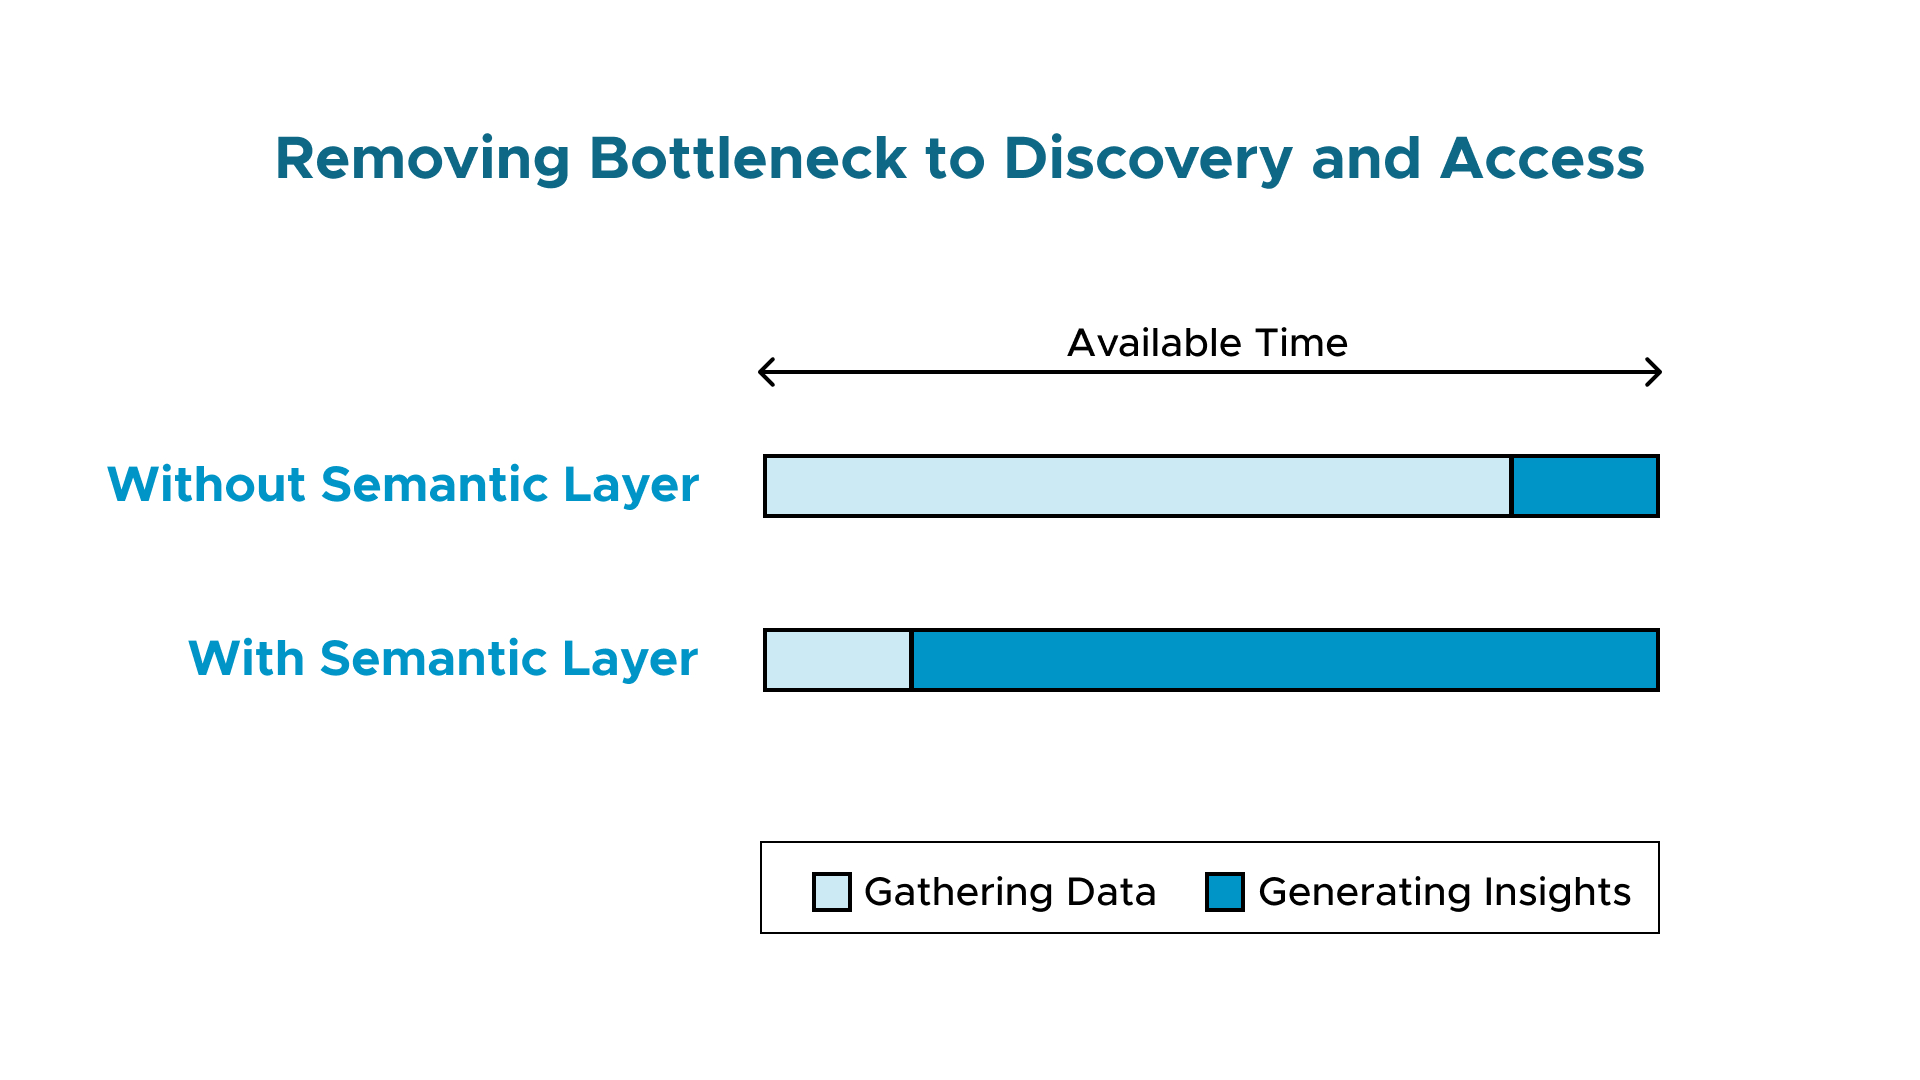 Removing bottleneck to discovery and access